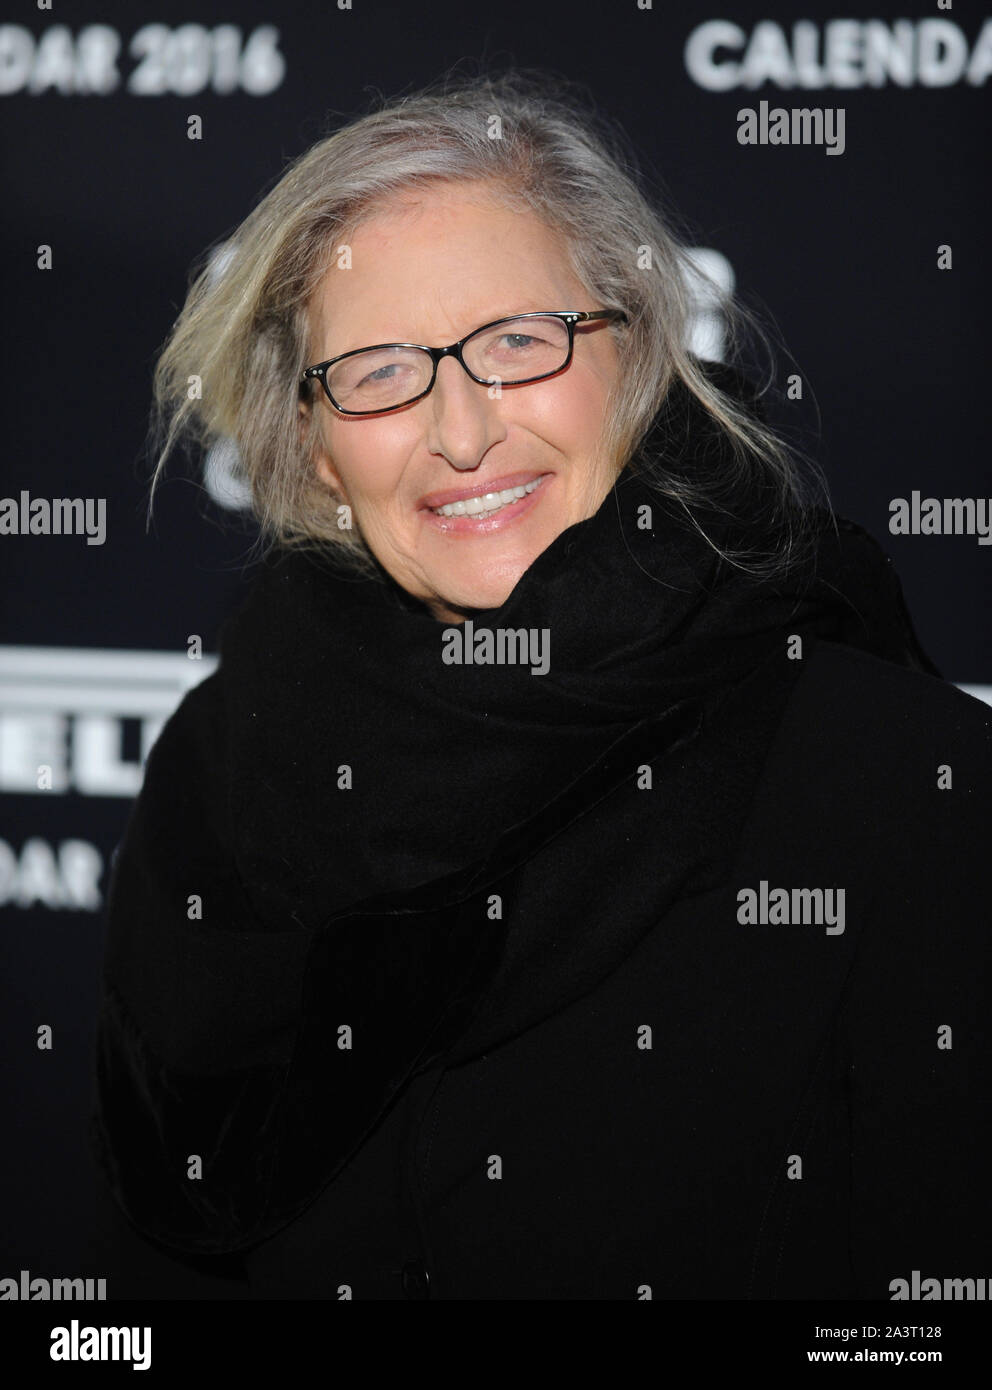 Photo Must Be Credited ©Kate Green/Alpha Press 079965 30/11/2015 Annie Leibovitz at the Pirelli Calendar 2016 Gala The Roundhouse London Stock Photo